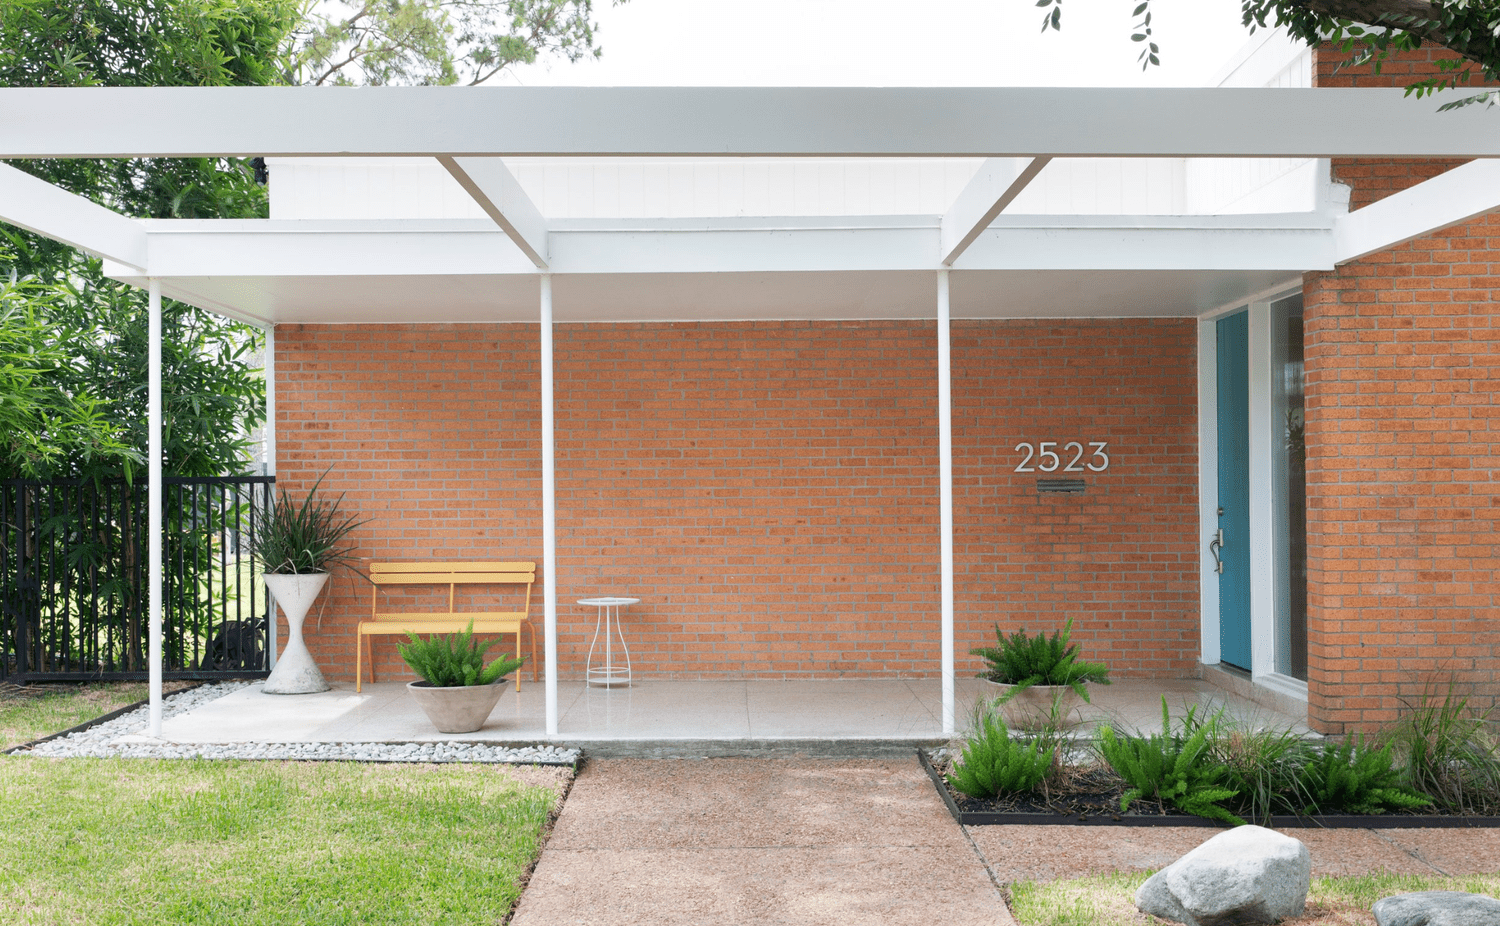 midcentury modern home with brick exterior and patio